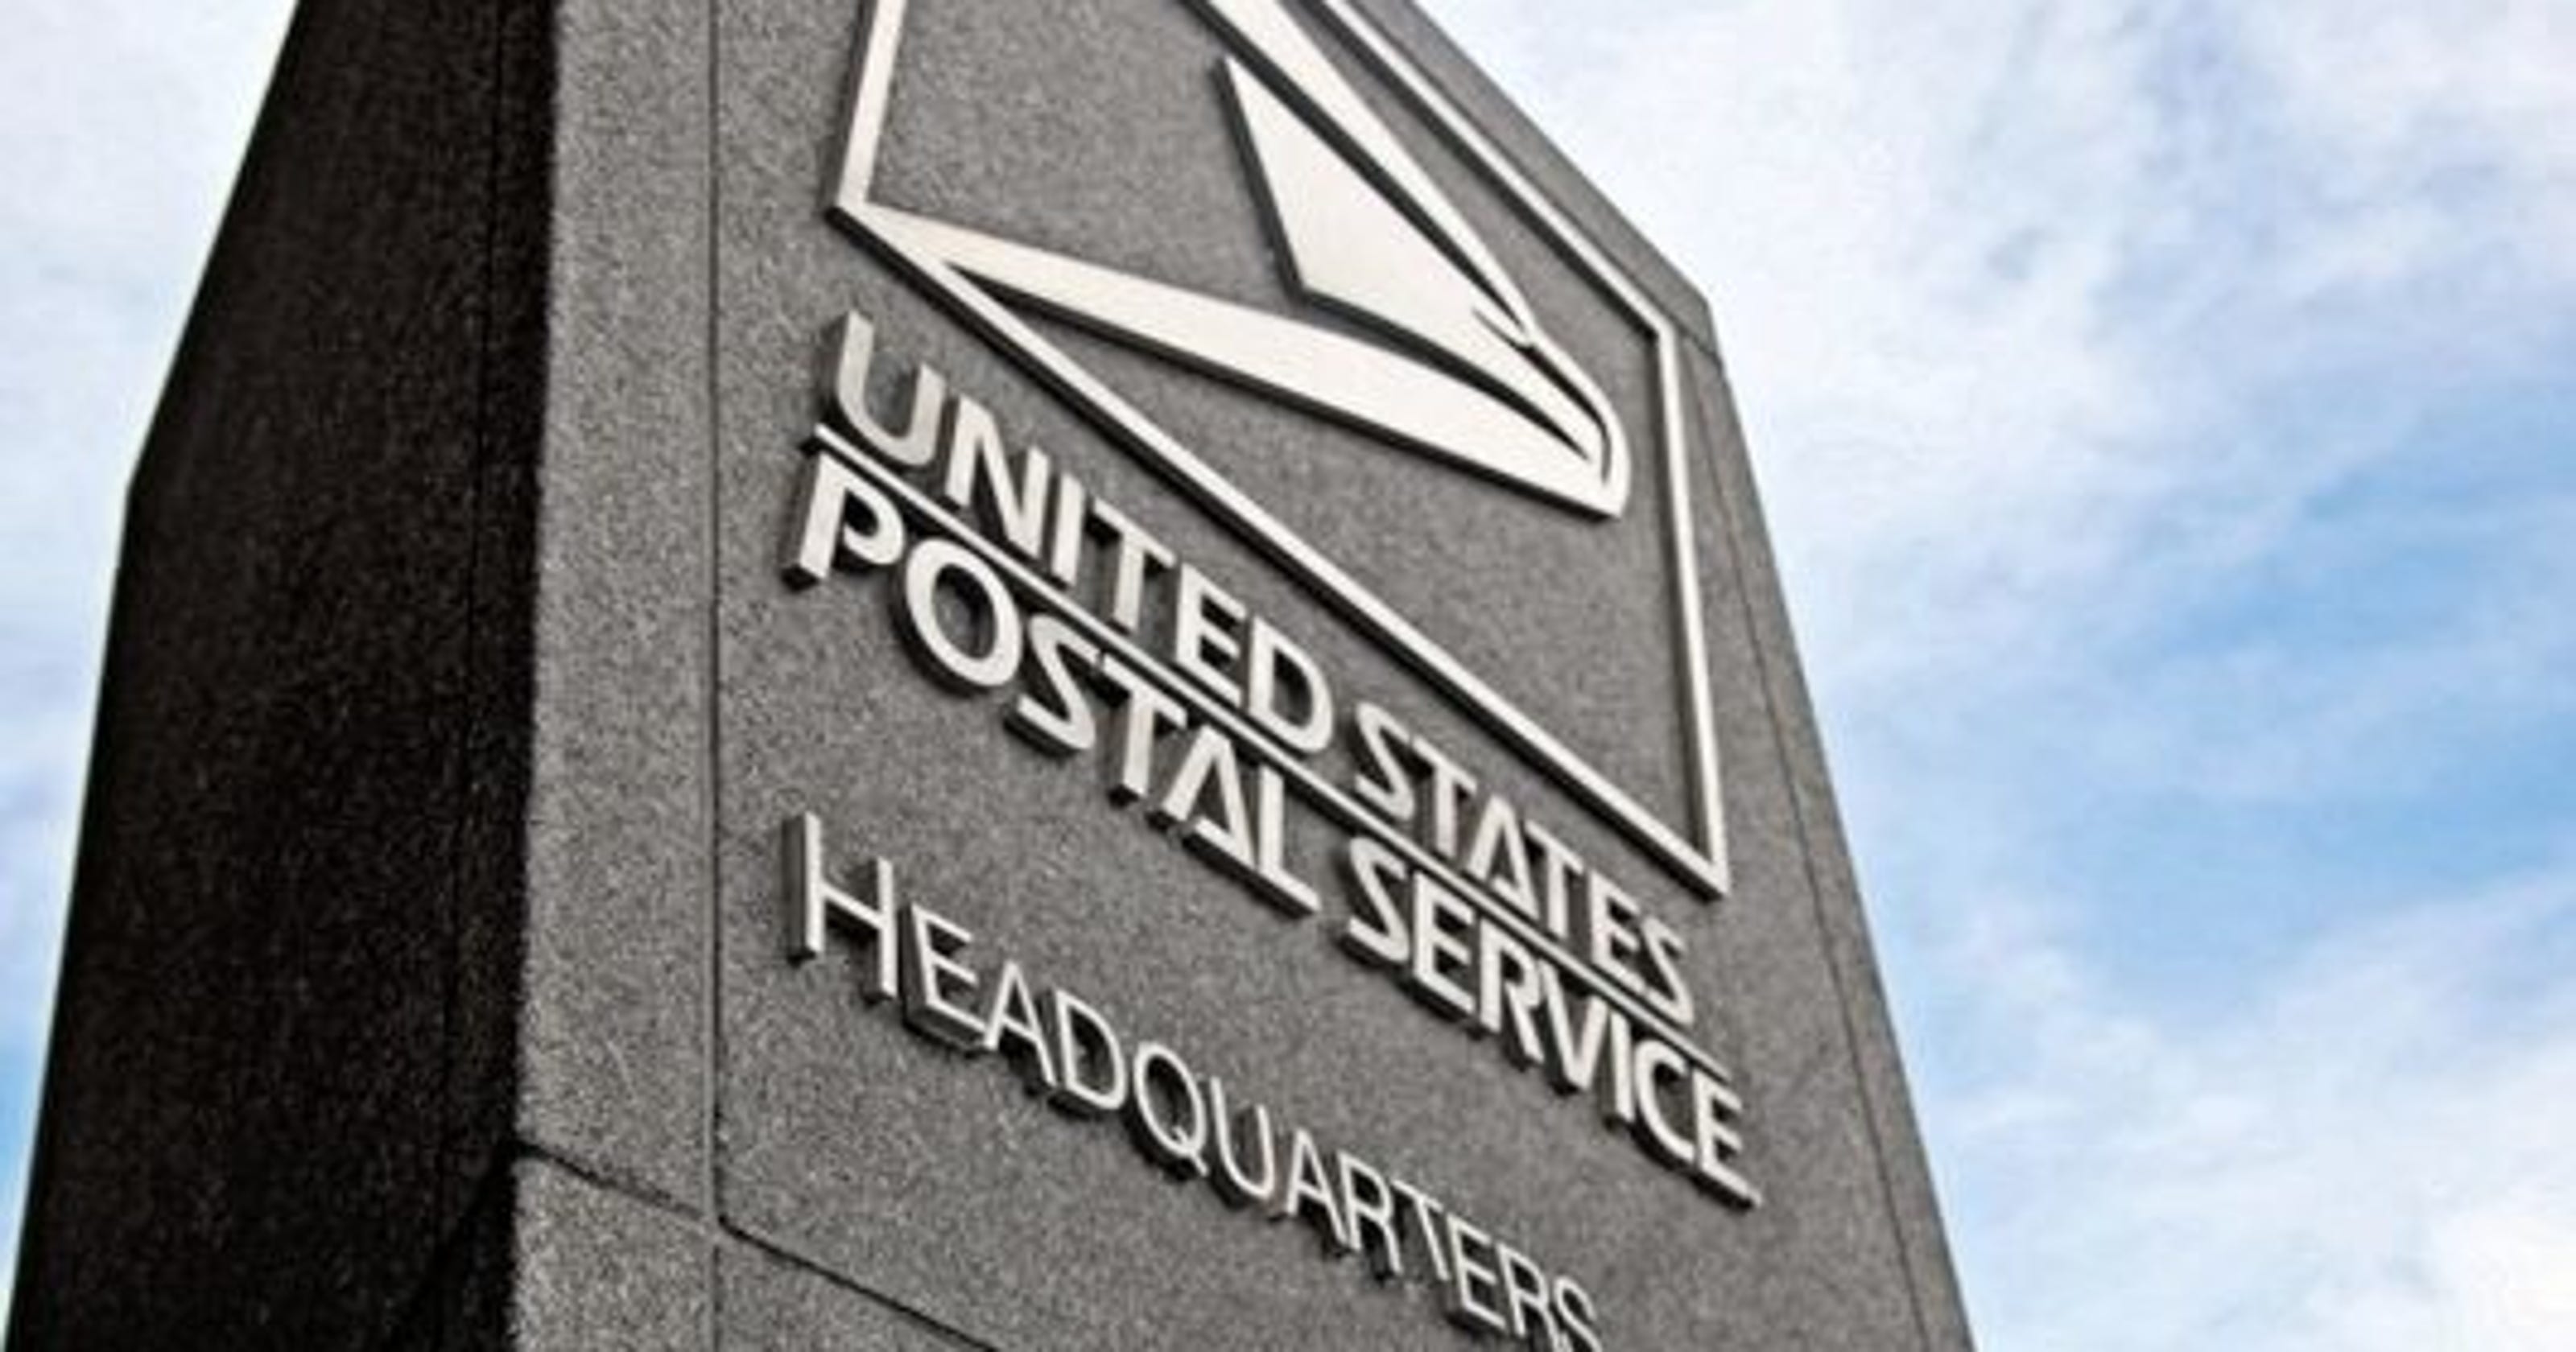 Post Office Holiday Hours And Locations